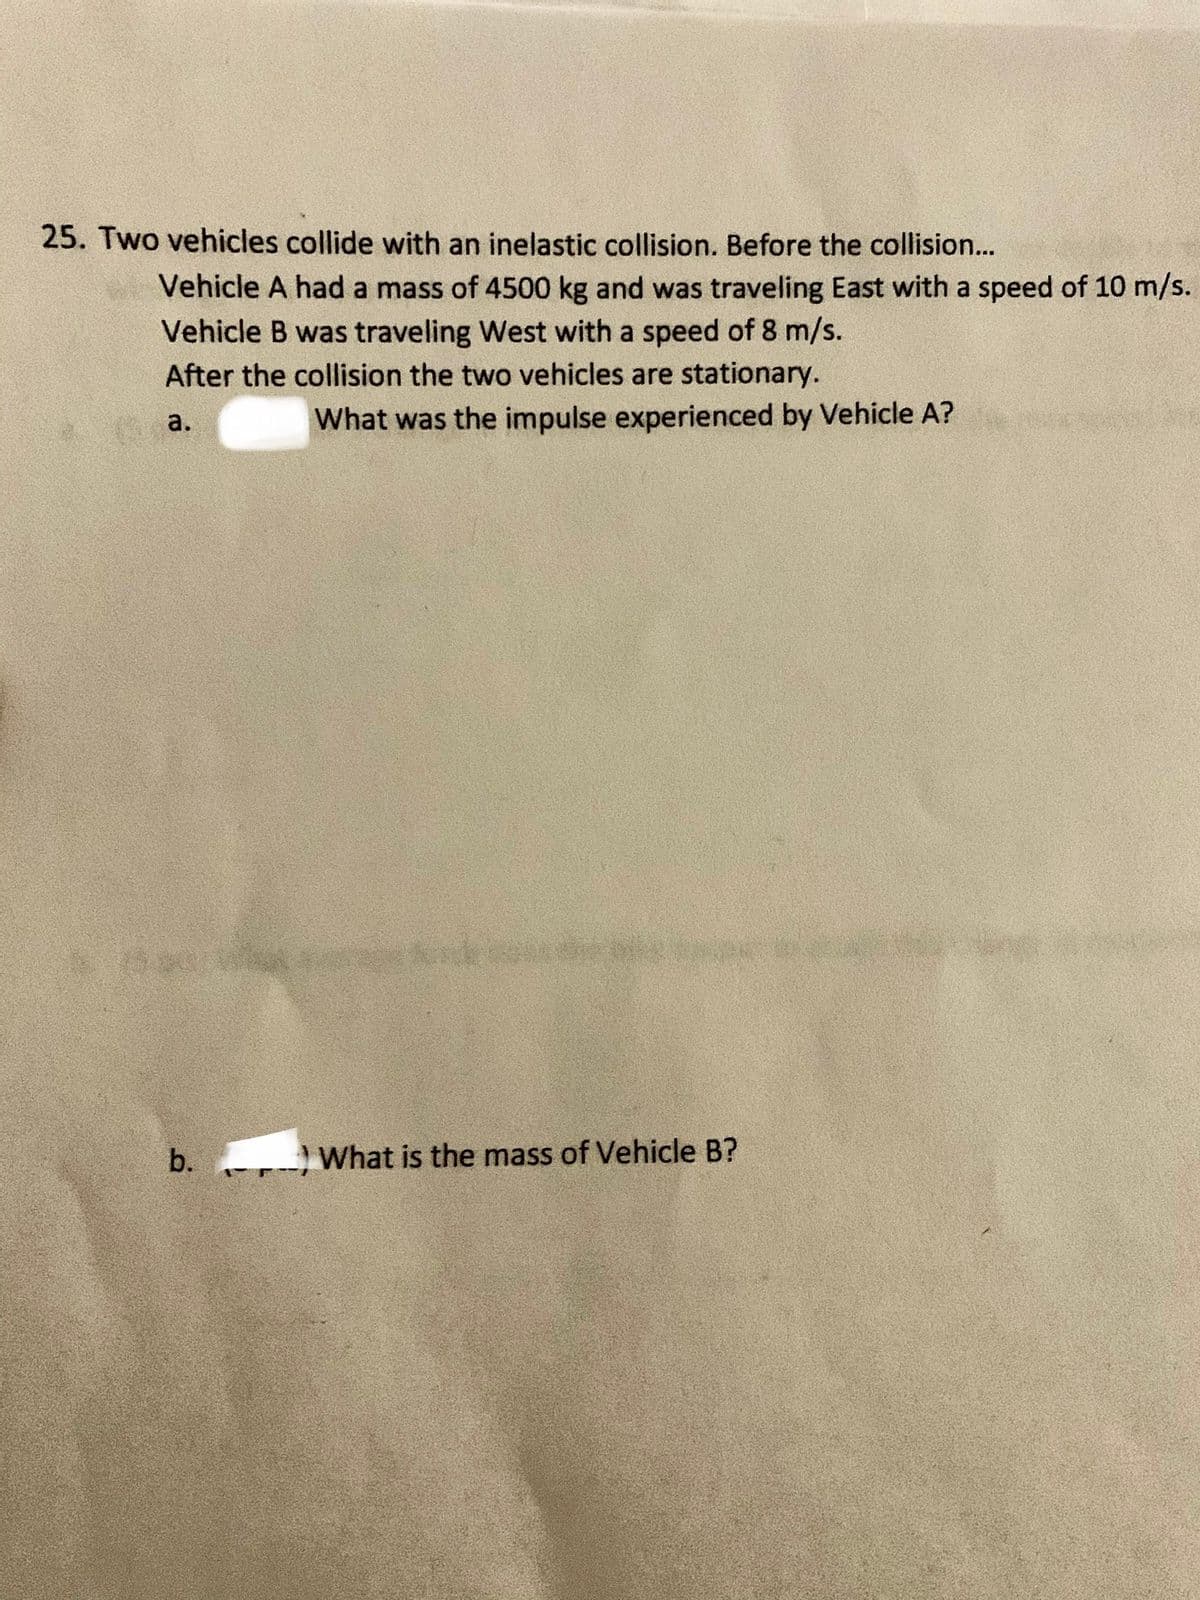 25. Two vehicles collide with an inelastic collision. Before the collision...
Vehicle A had a mass of 4500 kg and was traveling East with a speed of 10 m/s.
Vehicle B was traveling West with a speed of 8 m/s.
After the collision the two vehicles are stationary.
a.
What was the impulse experienced by Vehicle A?
And
b.
What is the mass of Vehicle B?
